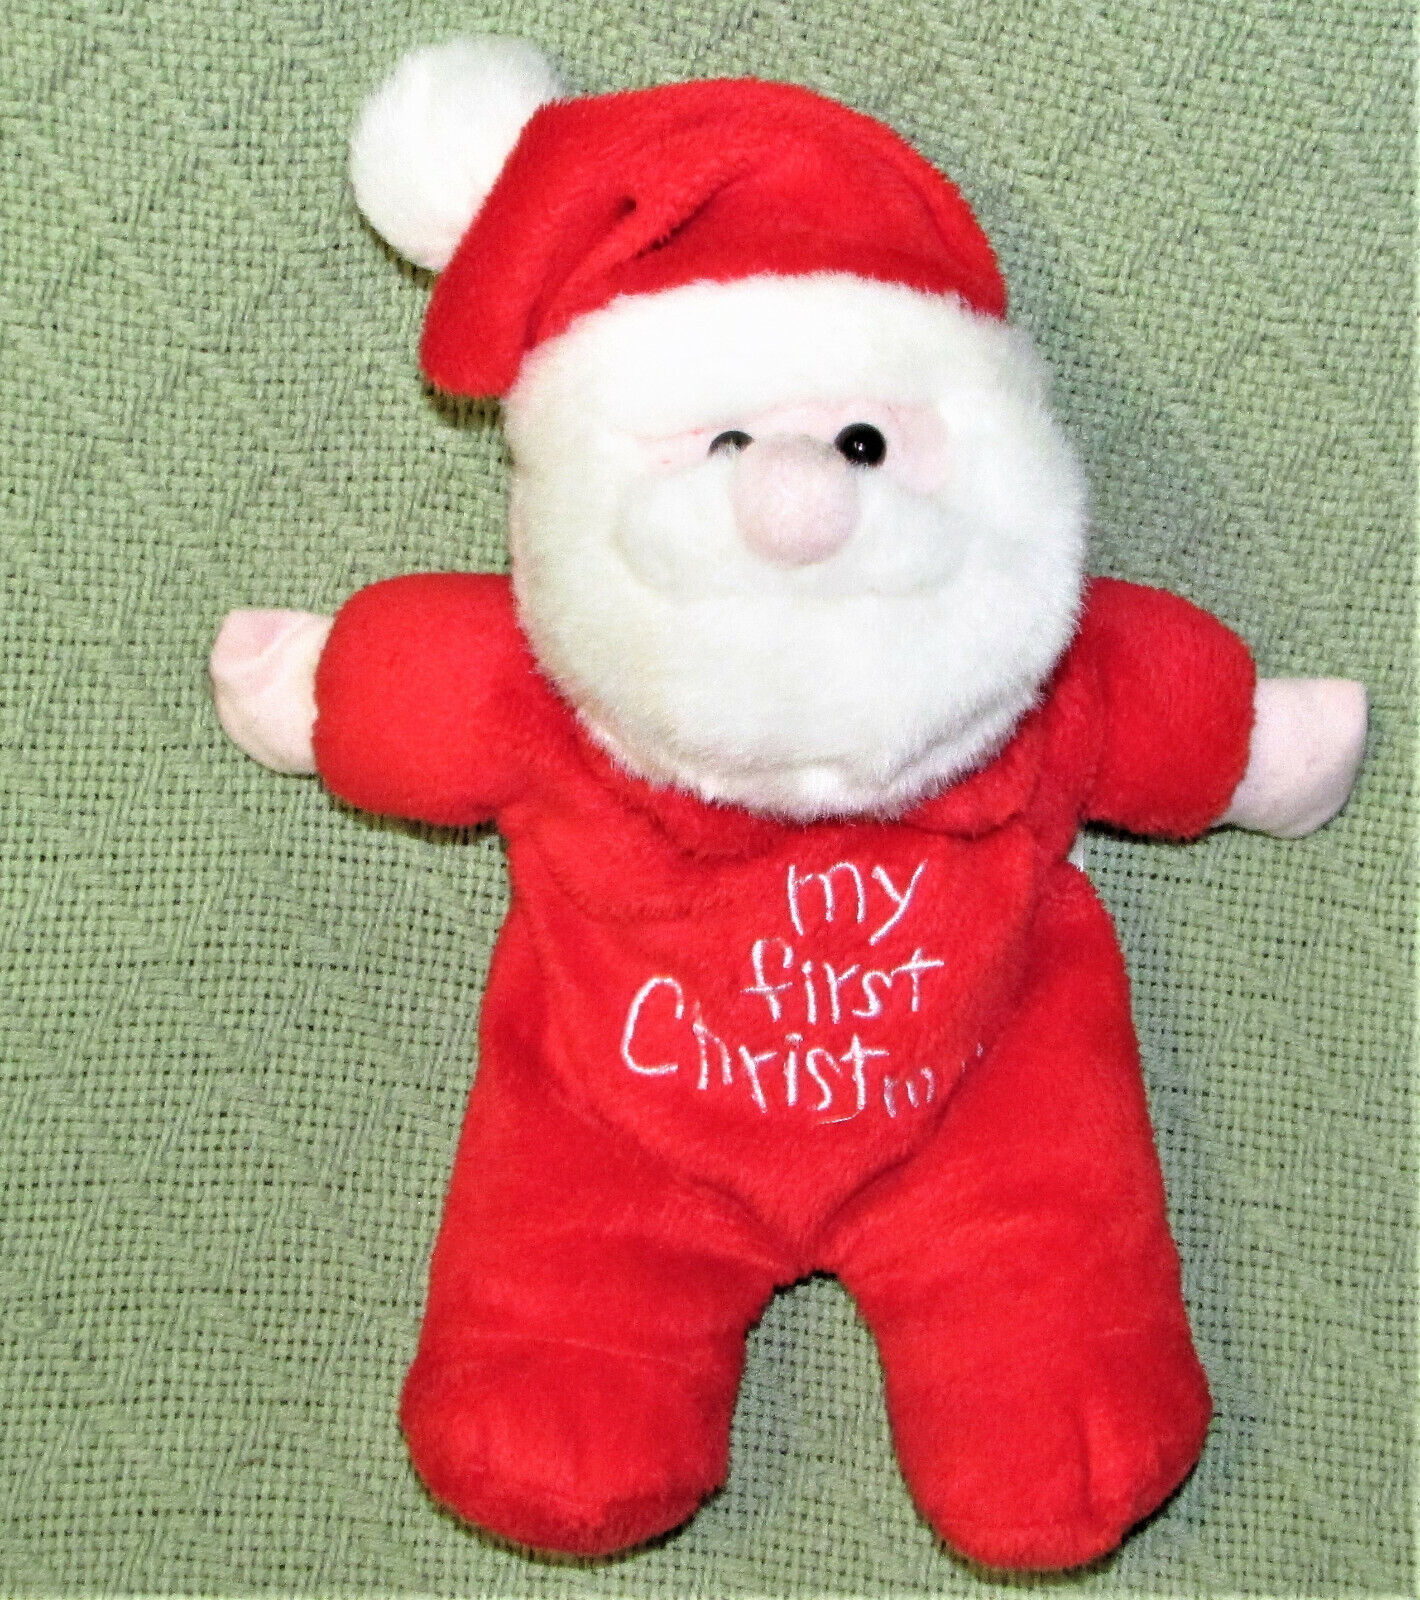 Primary image for DAN DEE MY FIRST CHRISTMAS SANTA CLAUS 10" PLUSH RED STUFFED ANIMAL BABY TOY